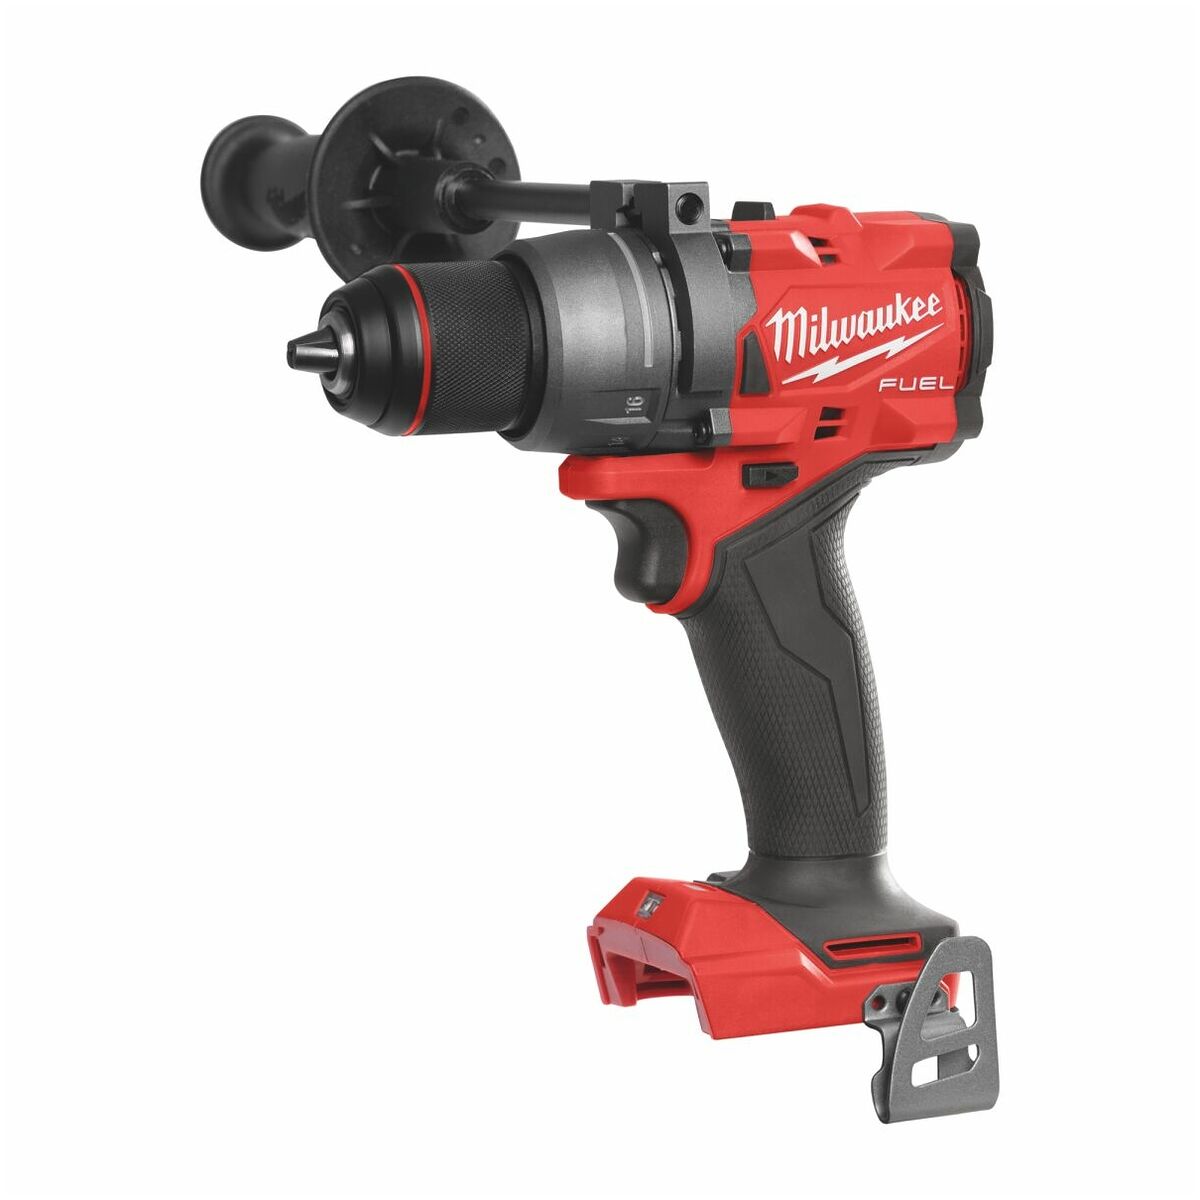 Simply buy Cordless drill/driver without battery or charger